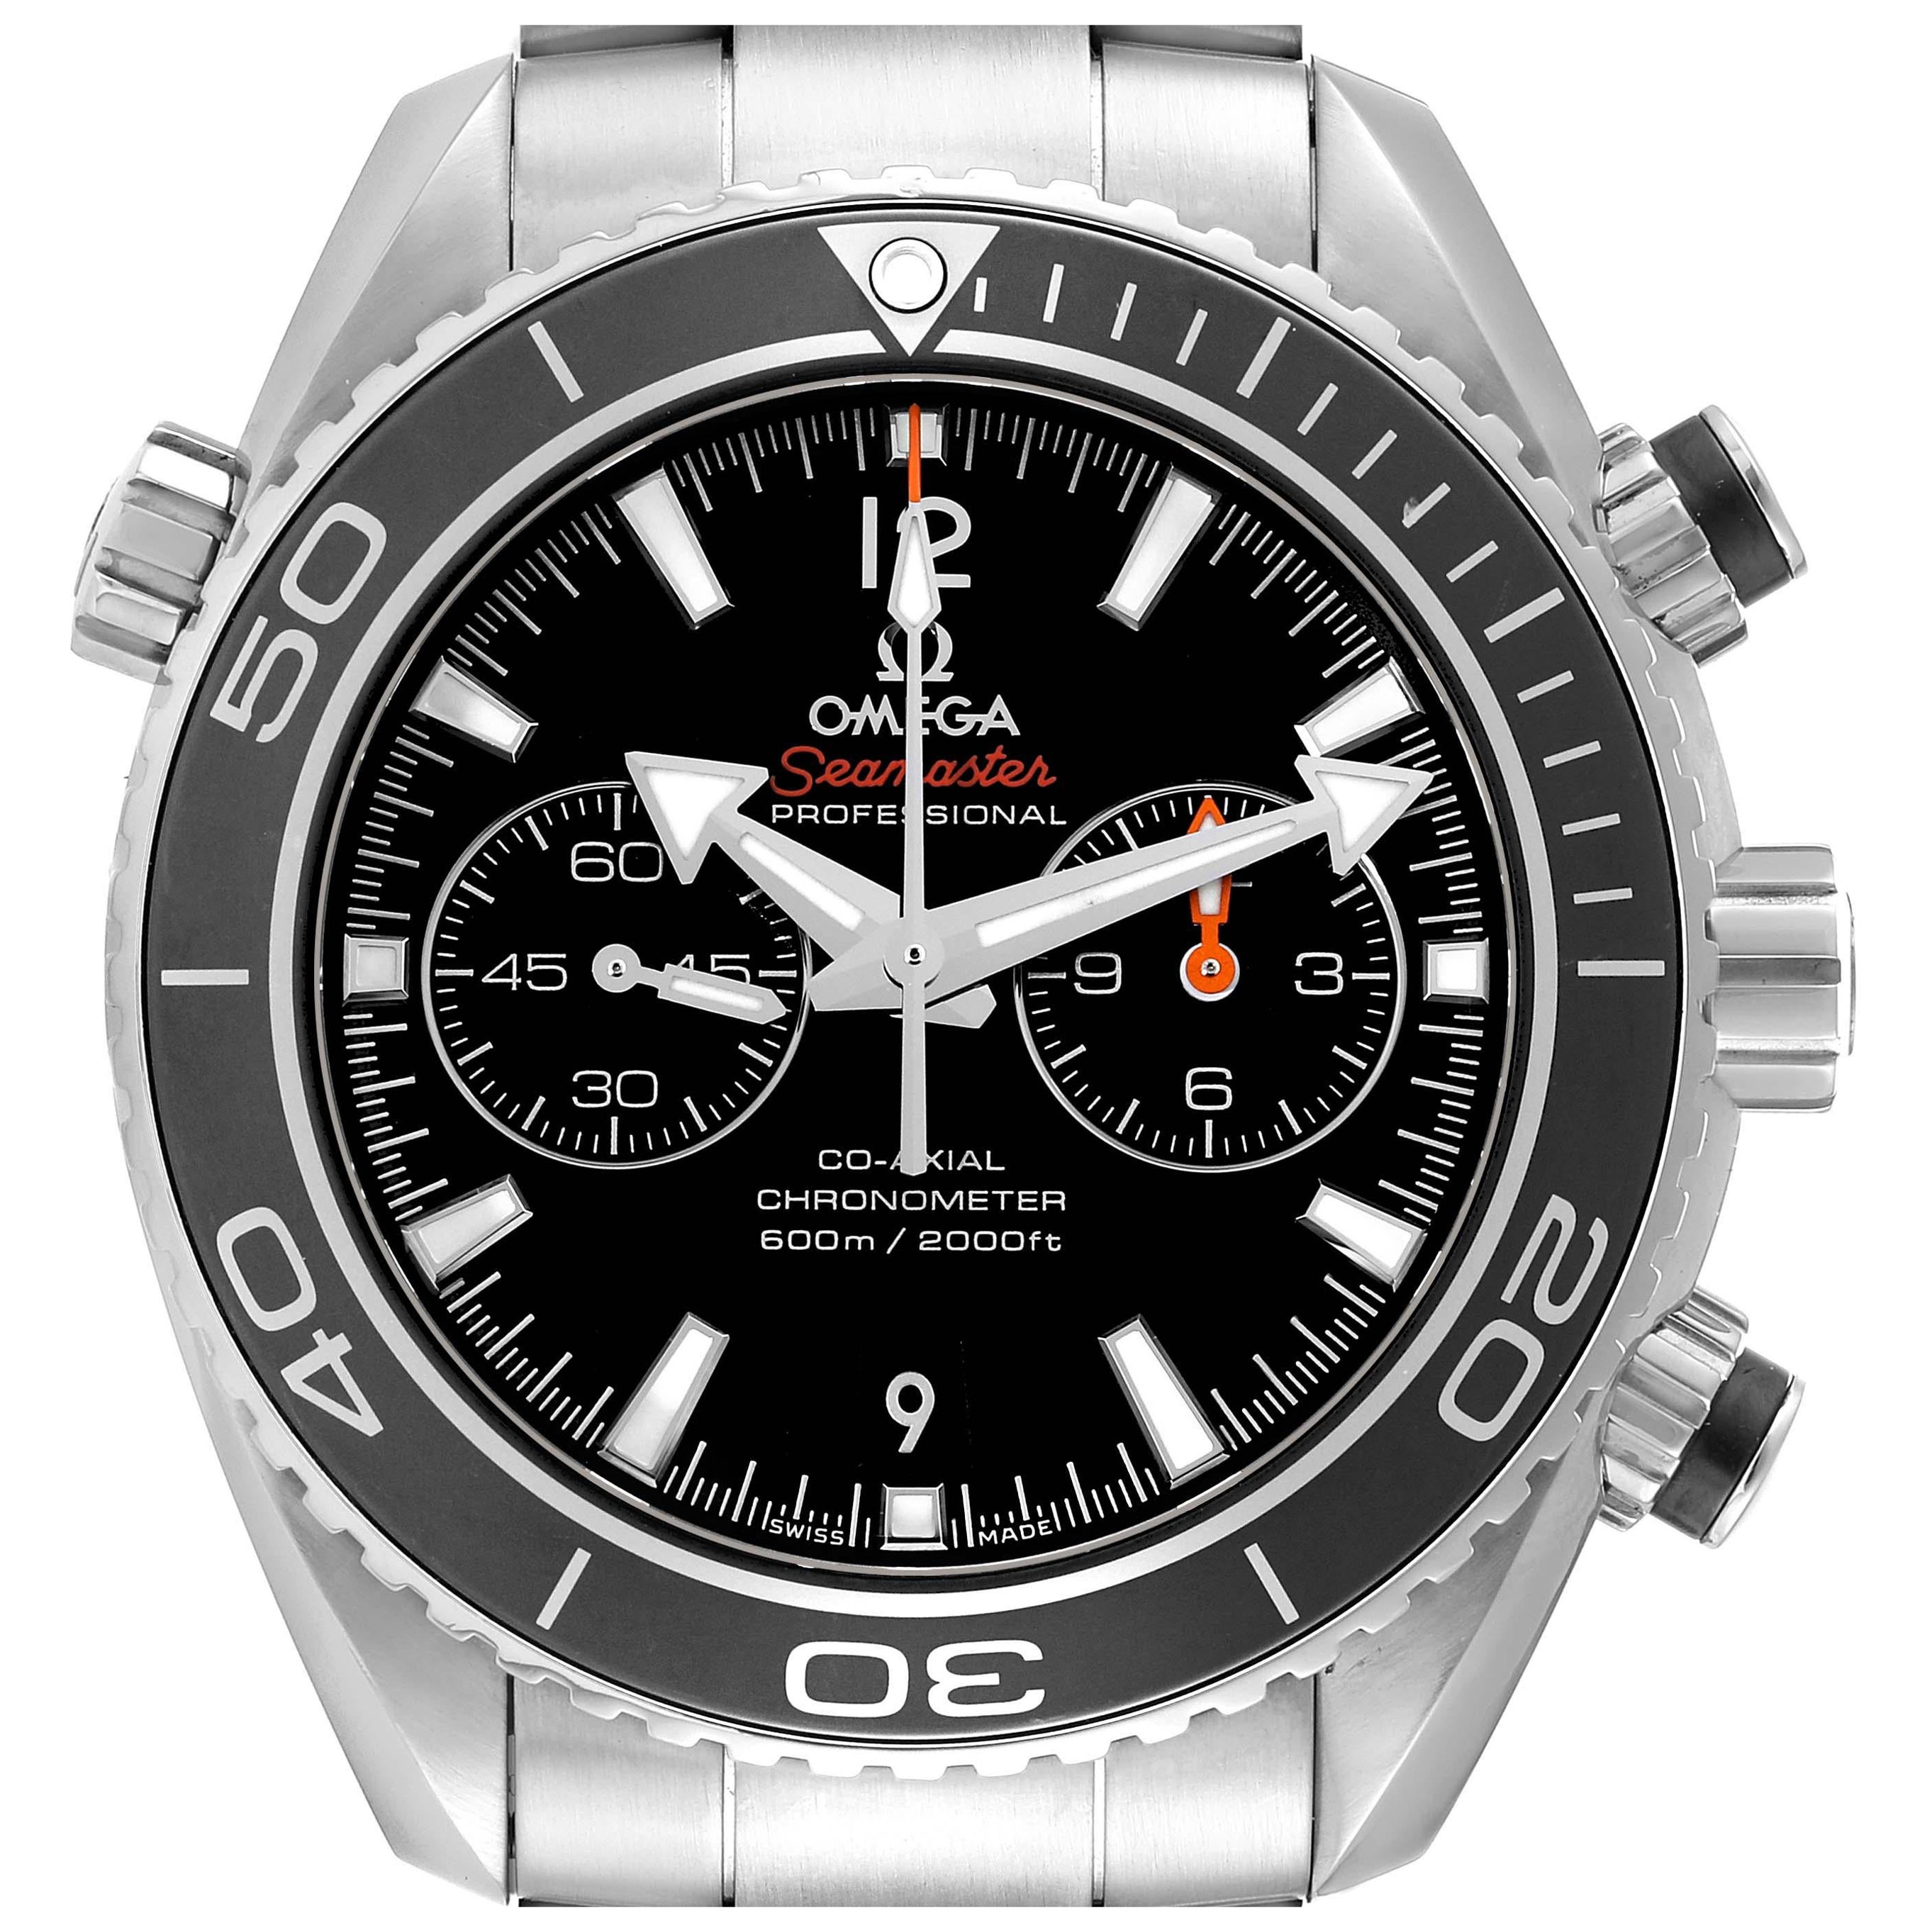 Omega Seamaster Planet Ocean 600M Steel Mens Watch 232.30.46.51.01.001 Box Card For Sale